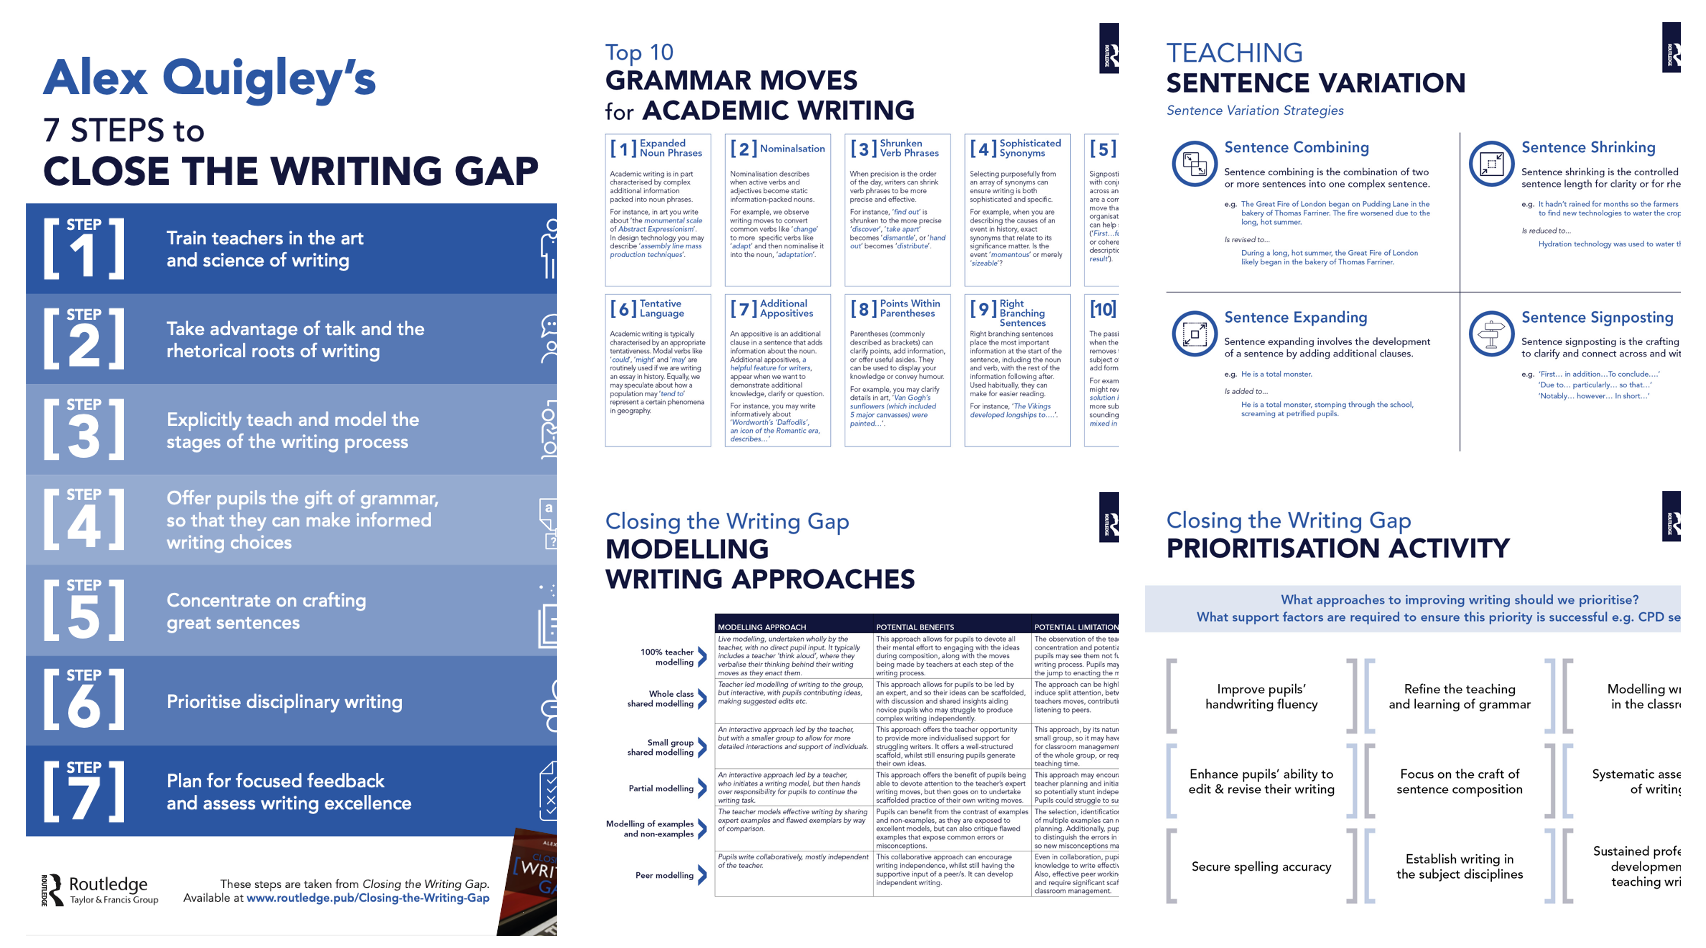 Closing the Writing Gap - New Resources